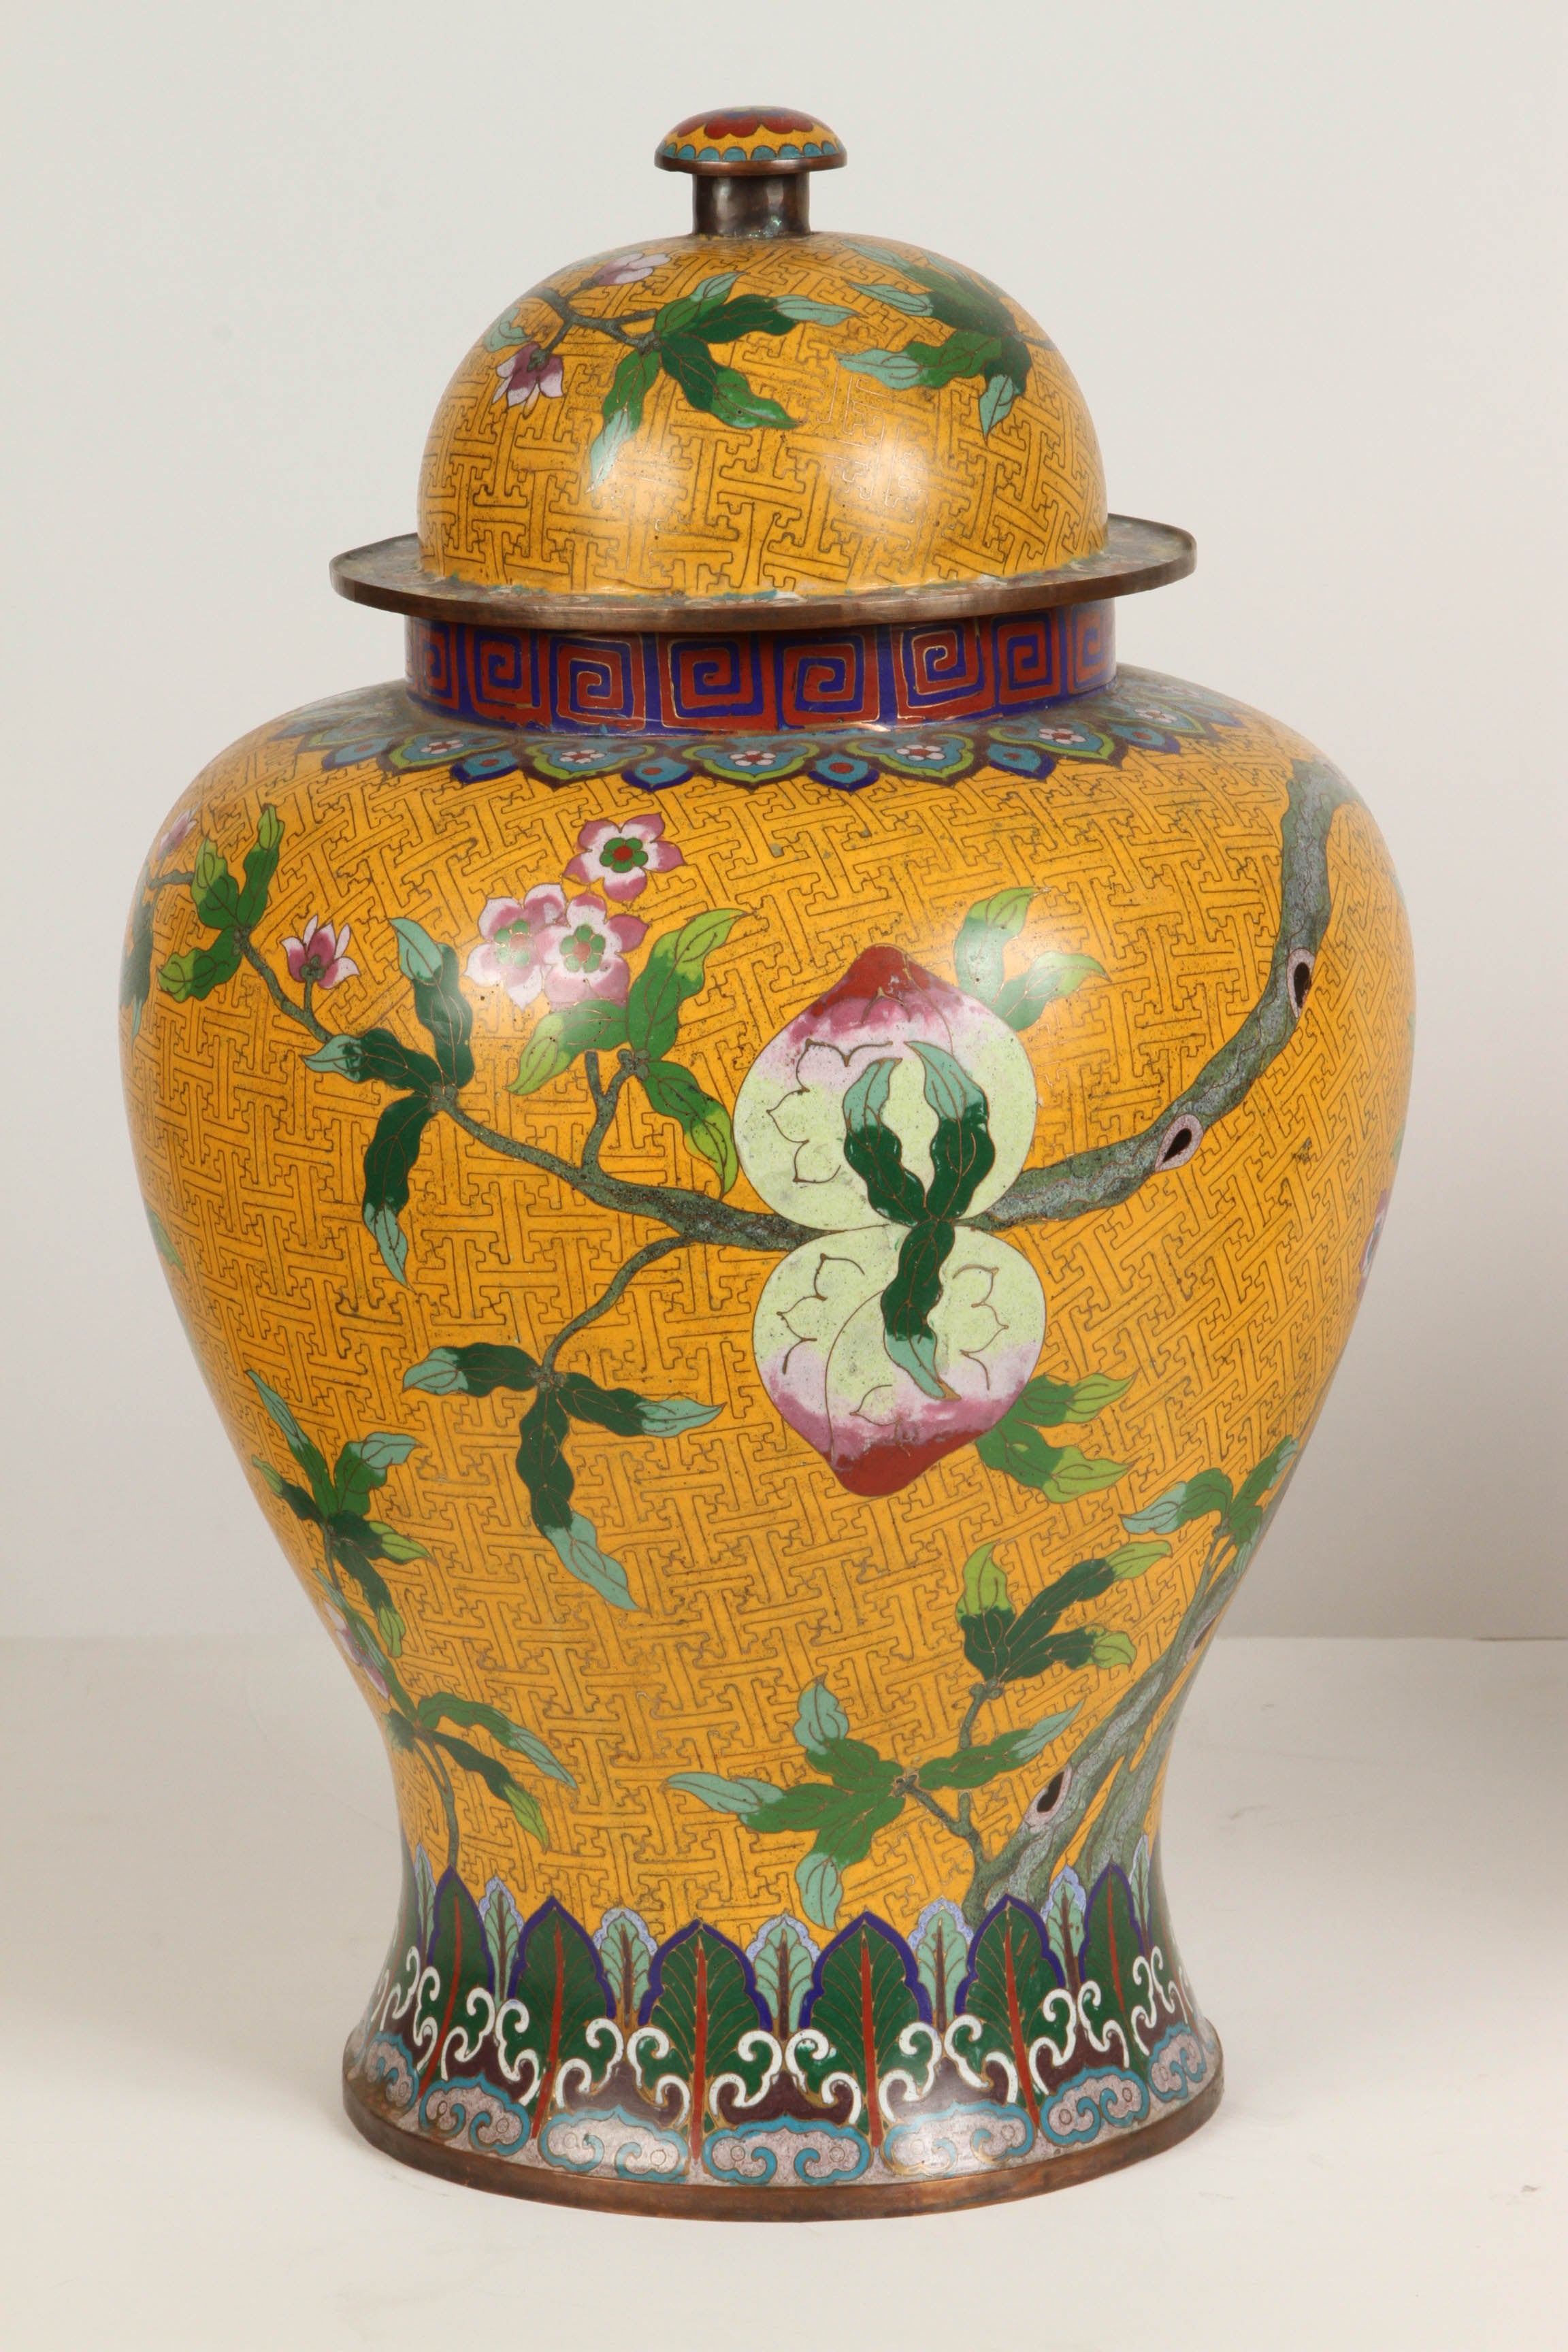 A stunningly beautiful 20th c. Chinese cloisonne temple jar with a yellow background and a peach tree branch depicted across the body of the jar. 